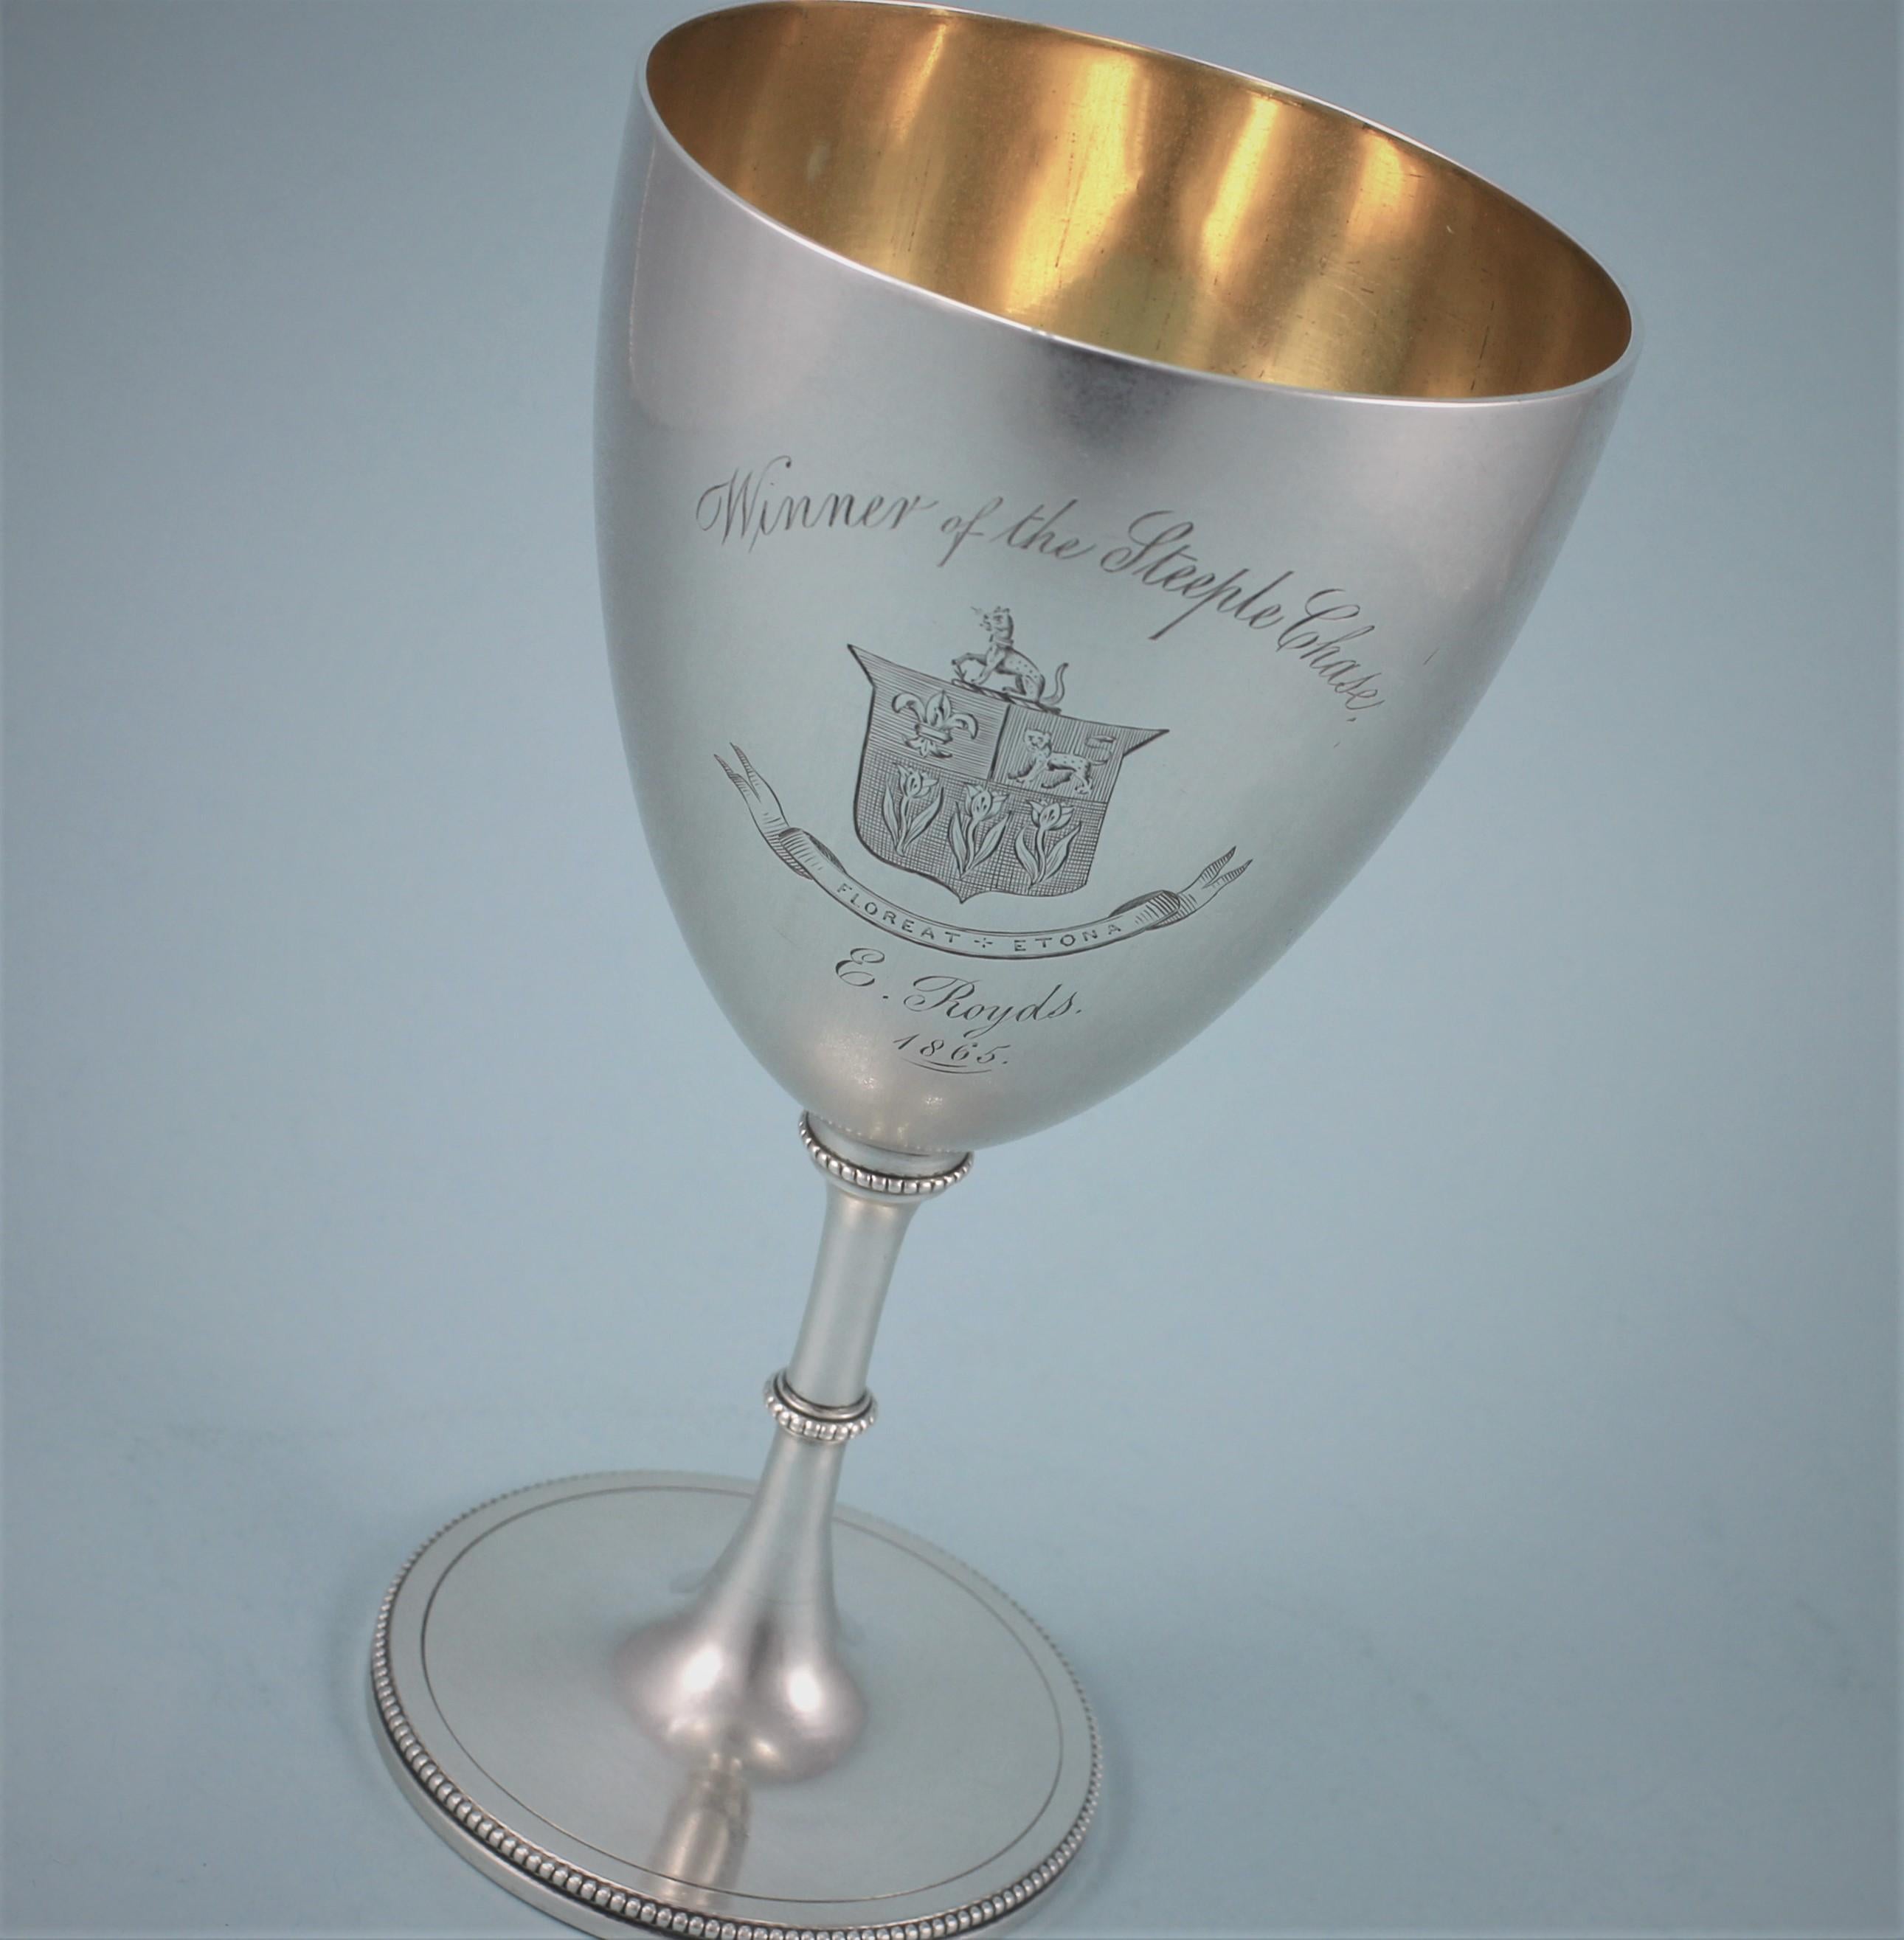 Elegant Victorian Eton College sterling silver goblet, silver gilt inside the bowl.
Maker: Daniel and Charles Houle. London 1864.
This goblet is one of a pair and is being sold individually.
The goblet is perfectly plain apart from the engraving